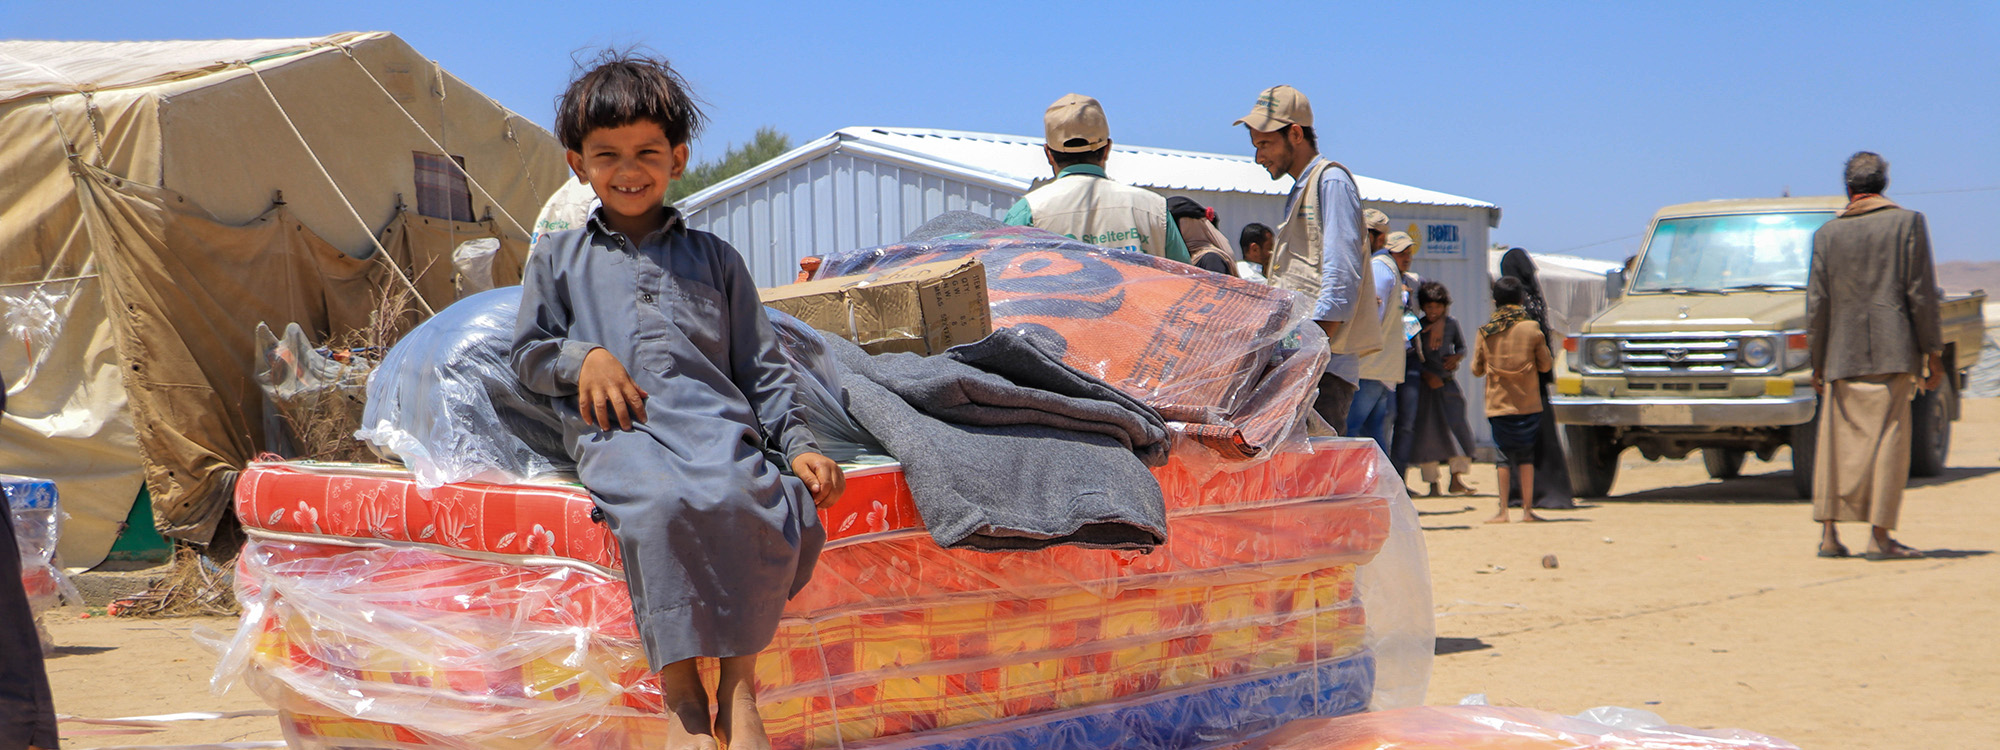 Boy sitting on top of mattresses and other ShelterBox aid in Yemen